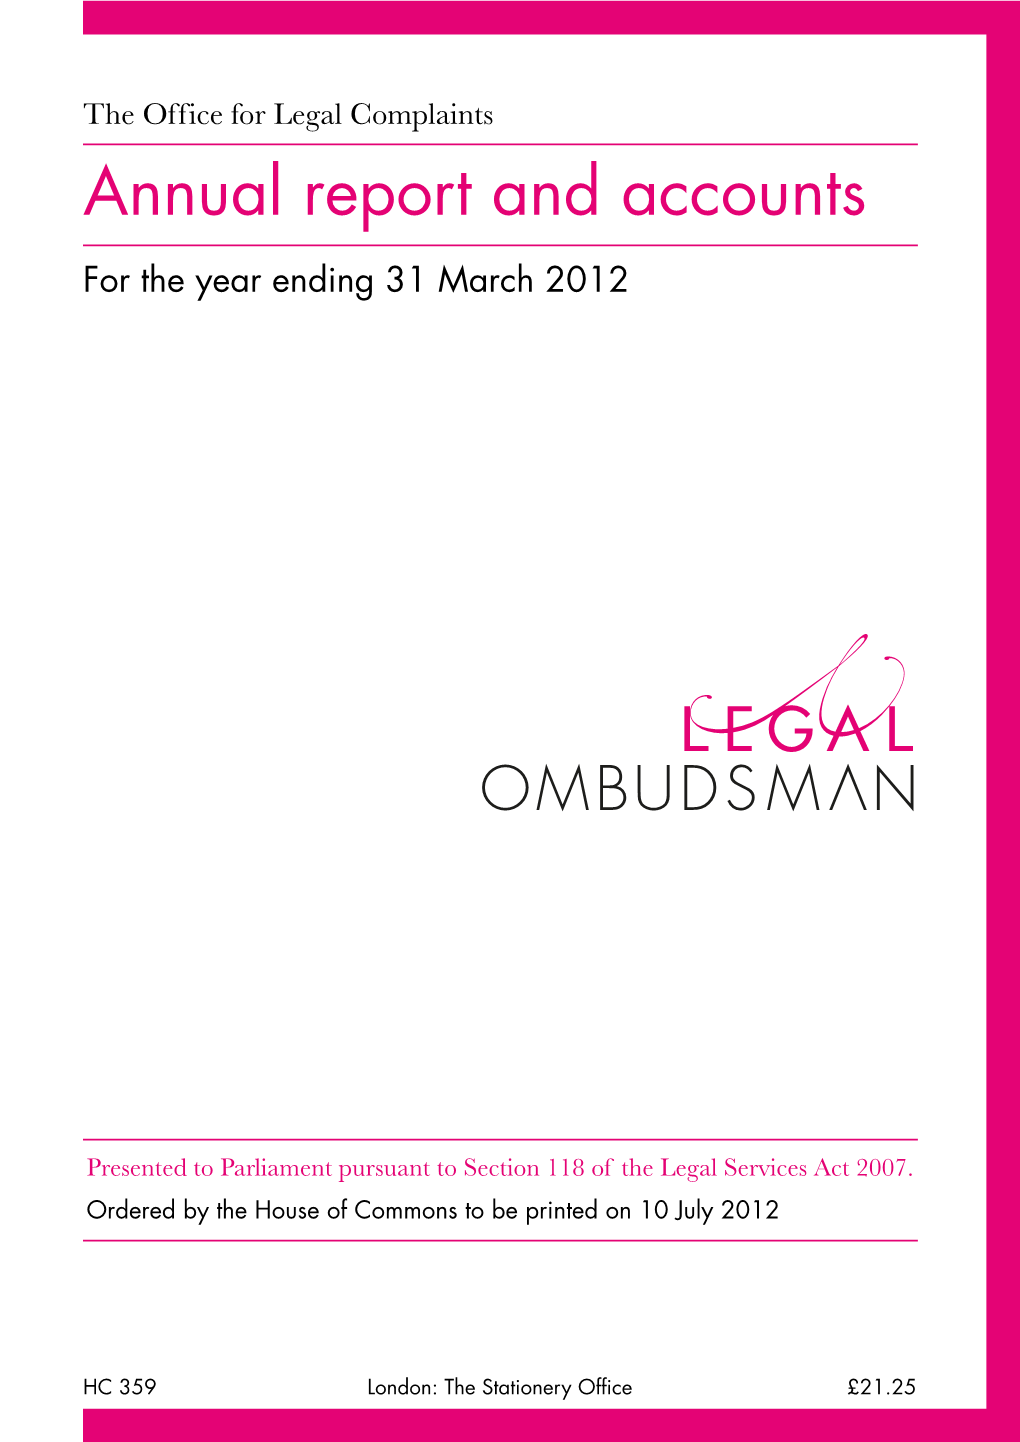 The Office for Legal Complaints Annual Report and Accounts for the Year Ending 31 March 2012